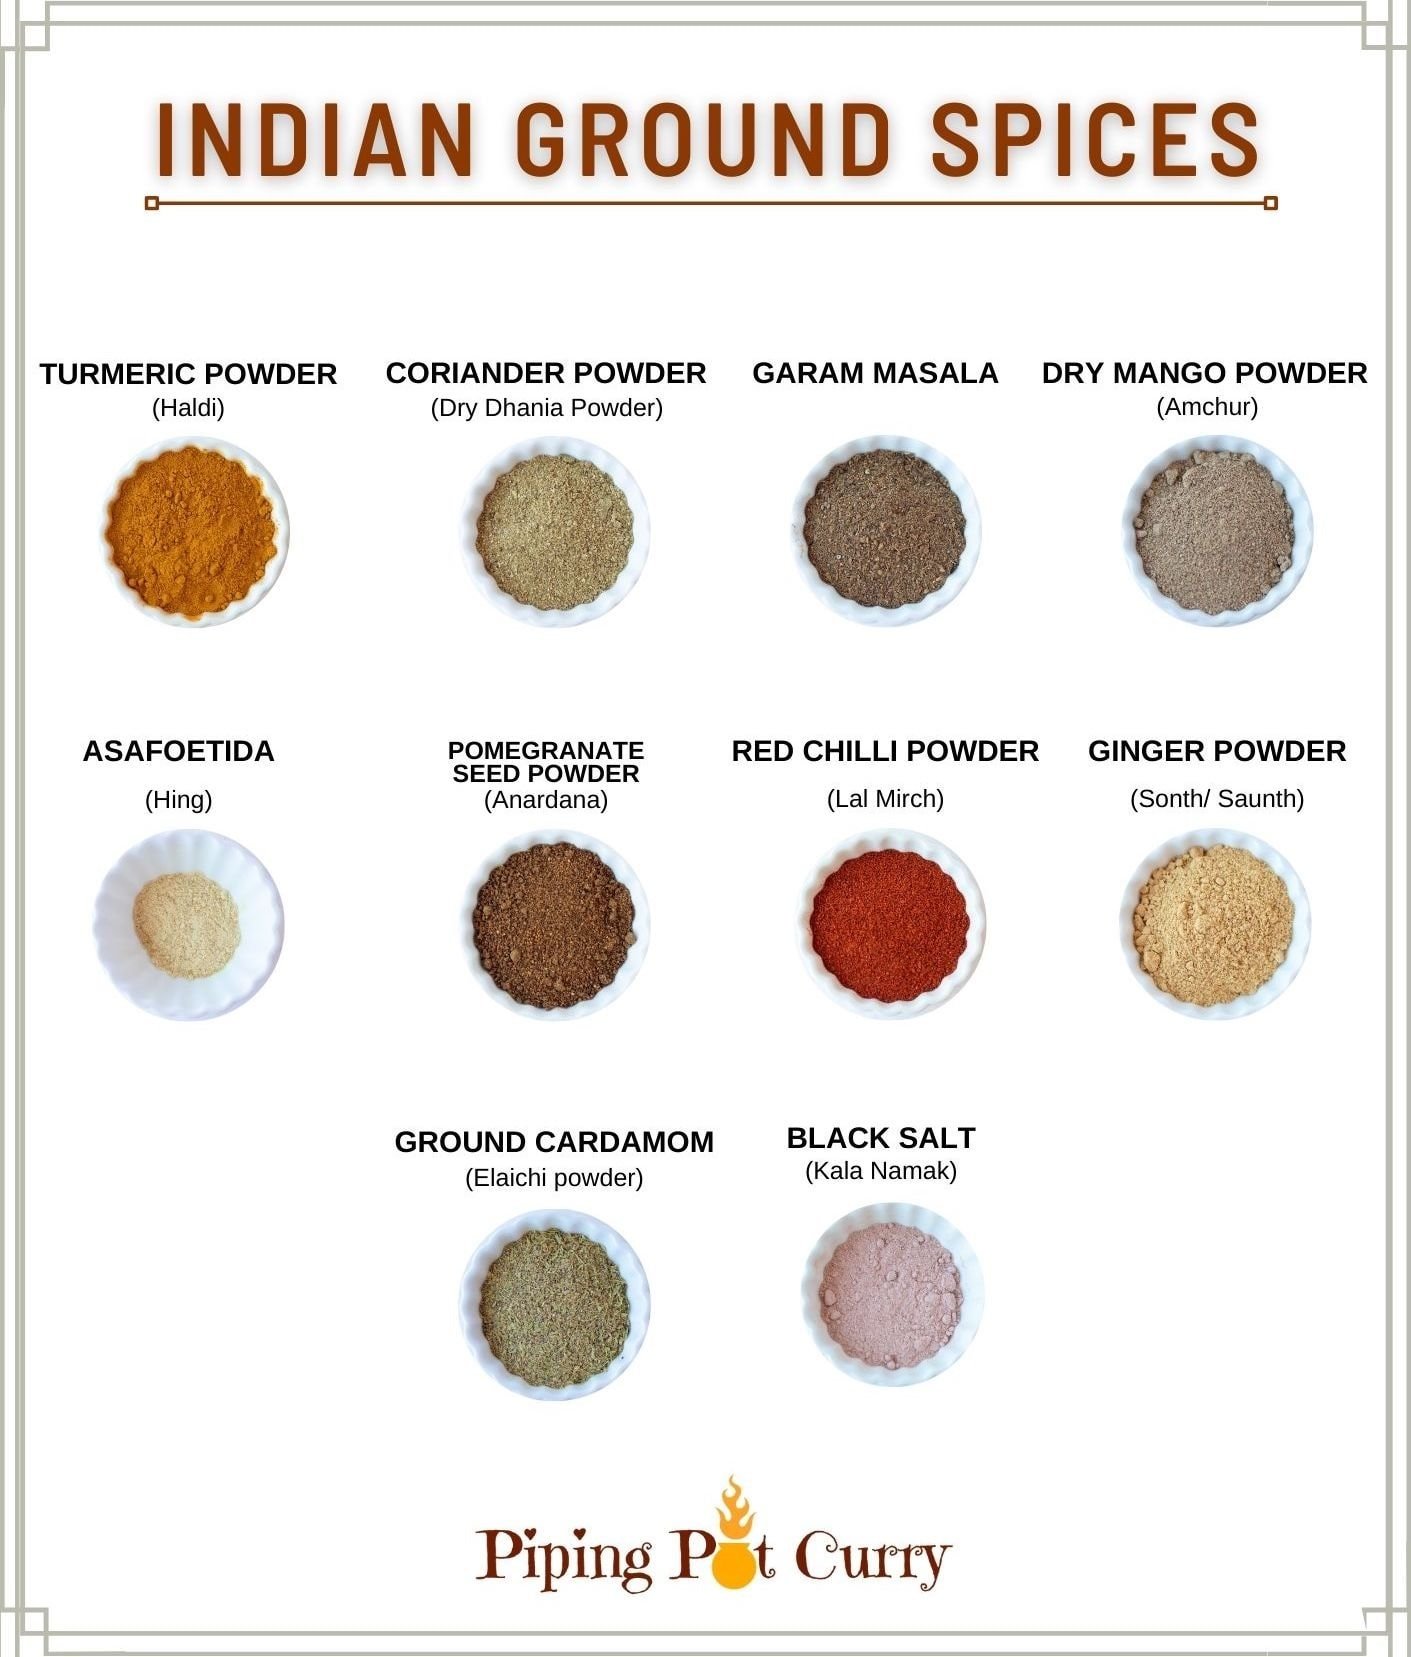 Indian spices images and names in English and hindi